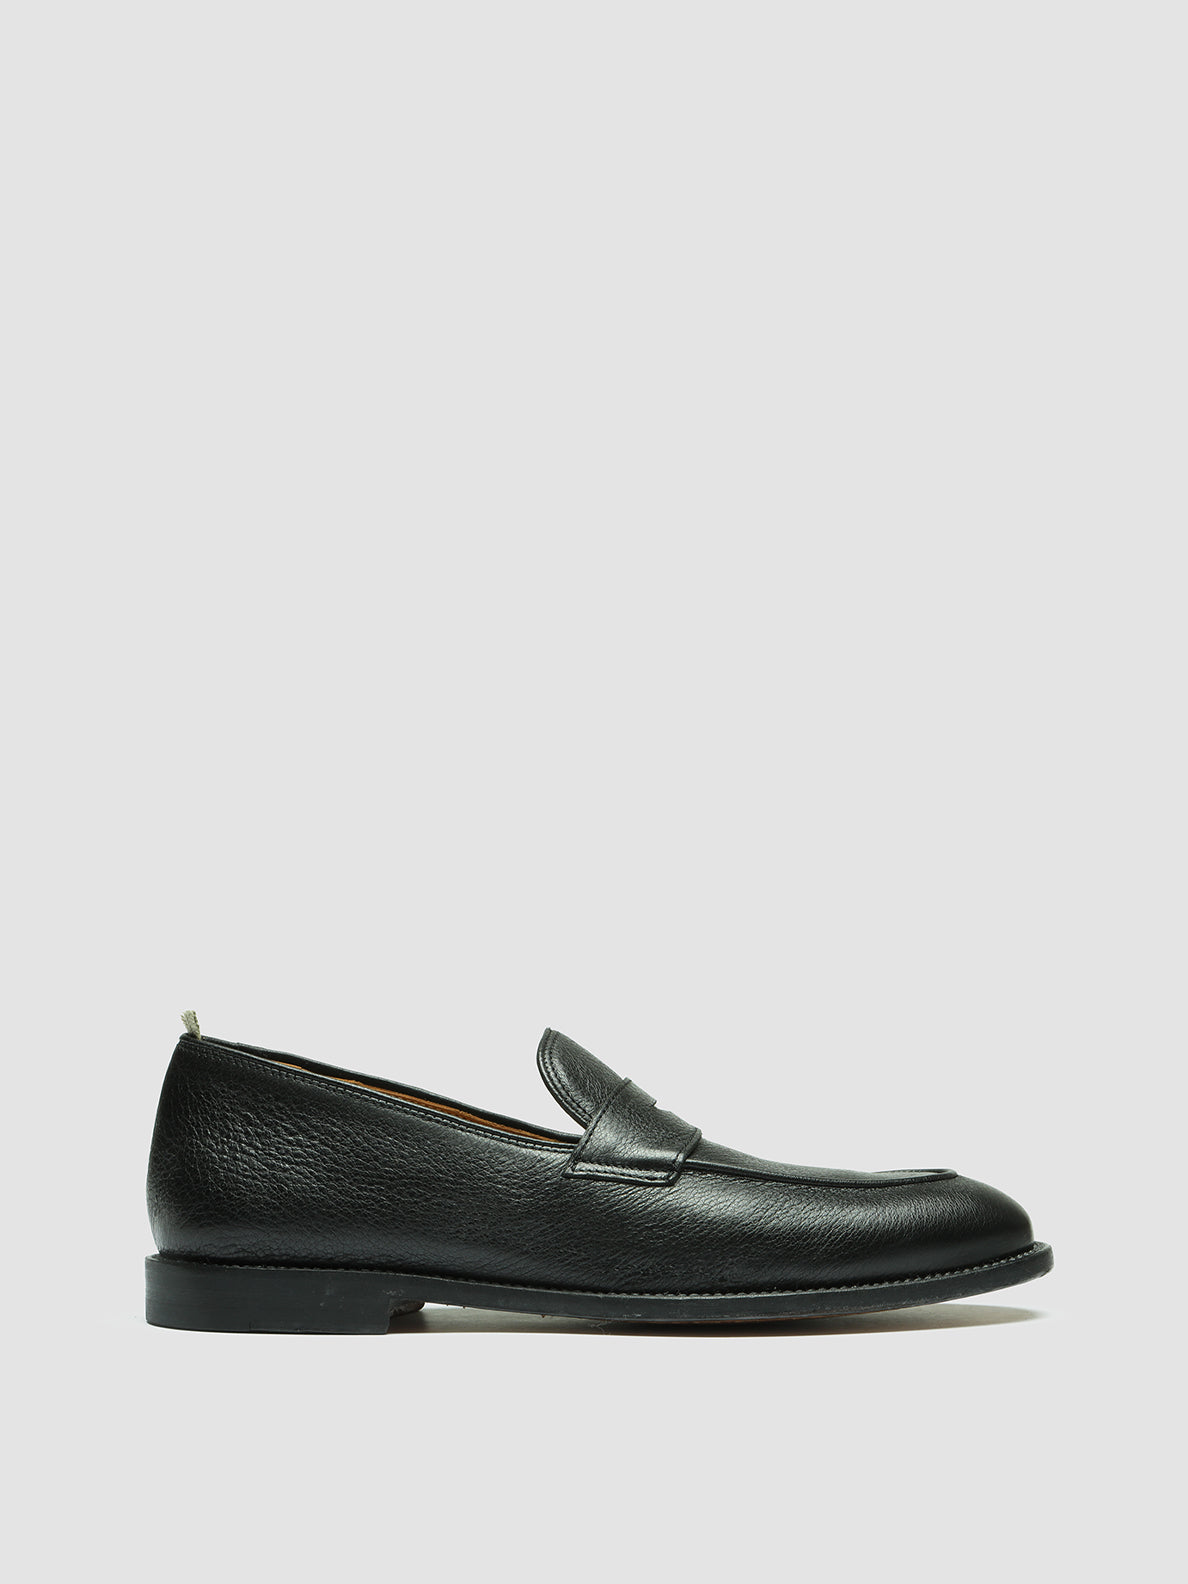 Mens Black Leather Penny Loafers: OPERA 001 – Officine Creative USA